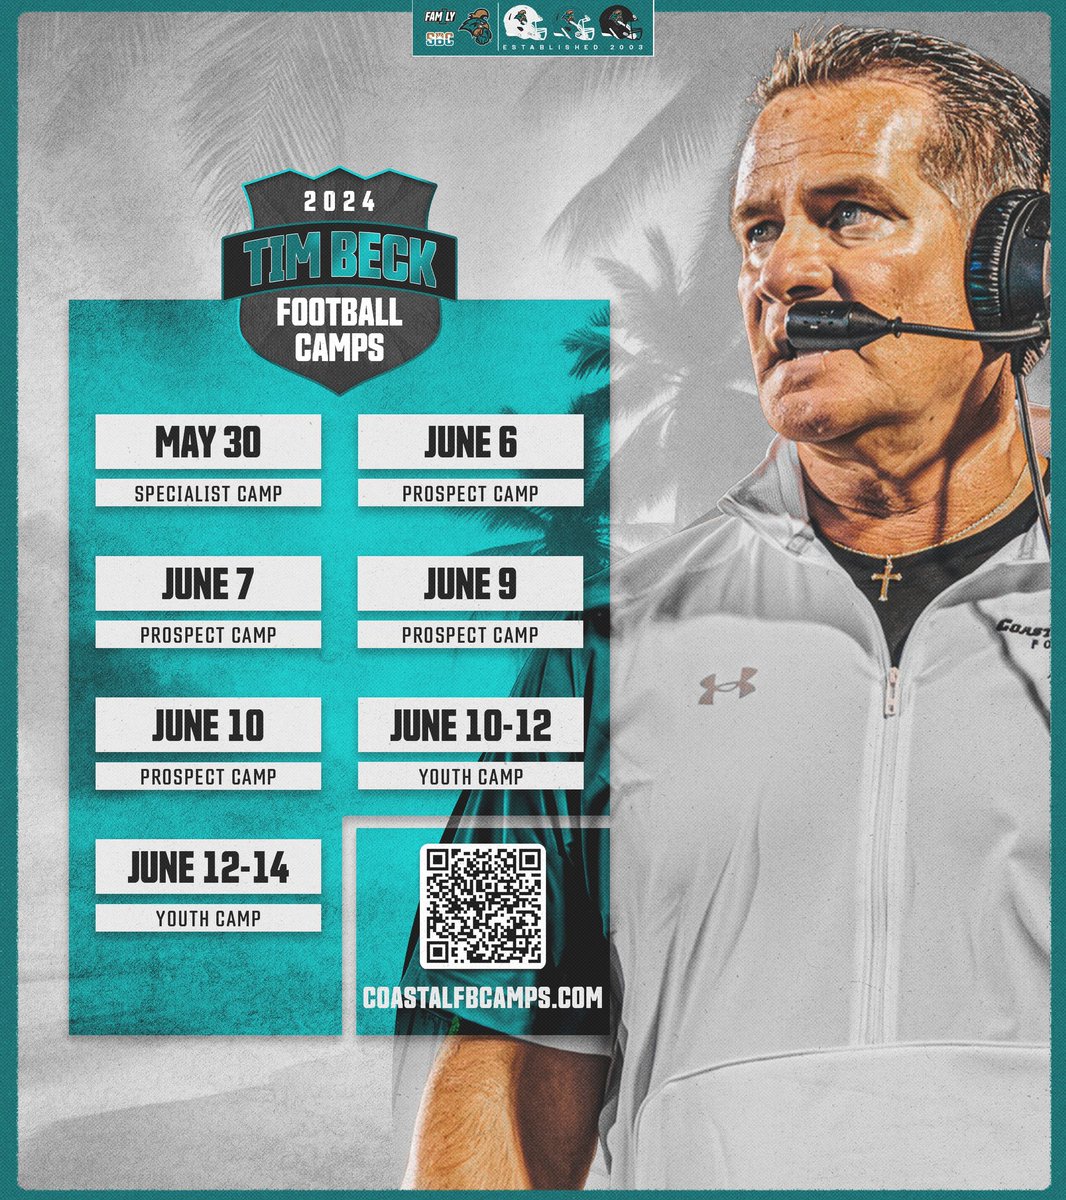 Come get coached up at the Beach. #BallingAtTheBeach